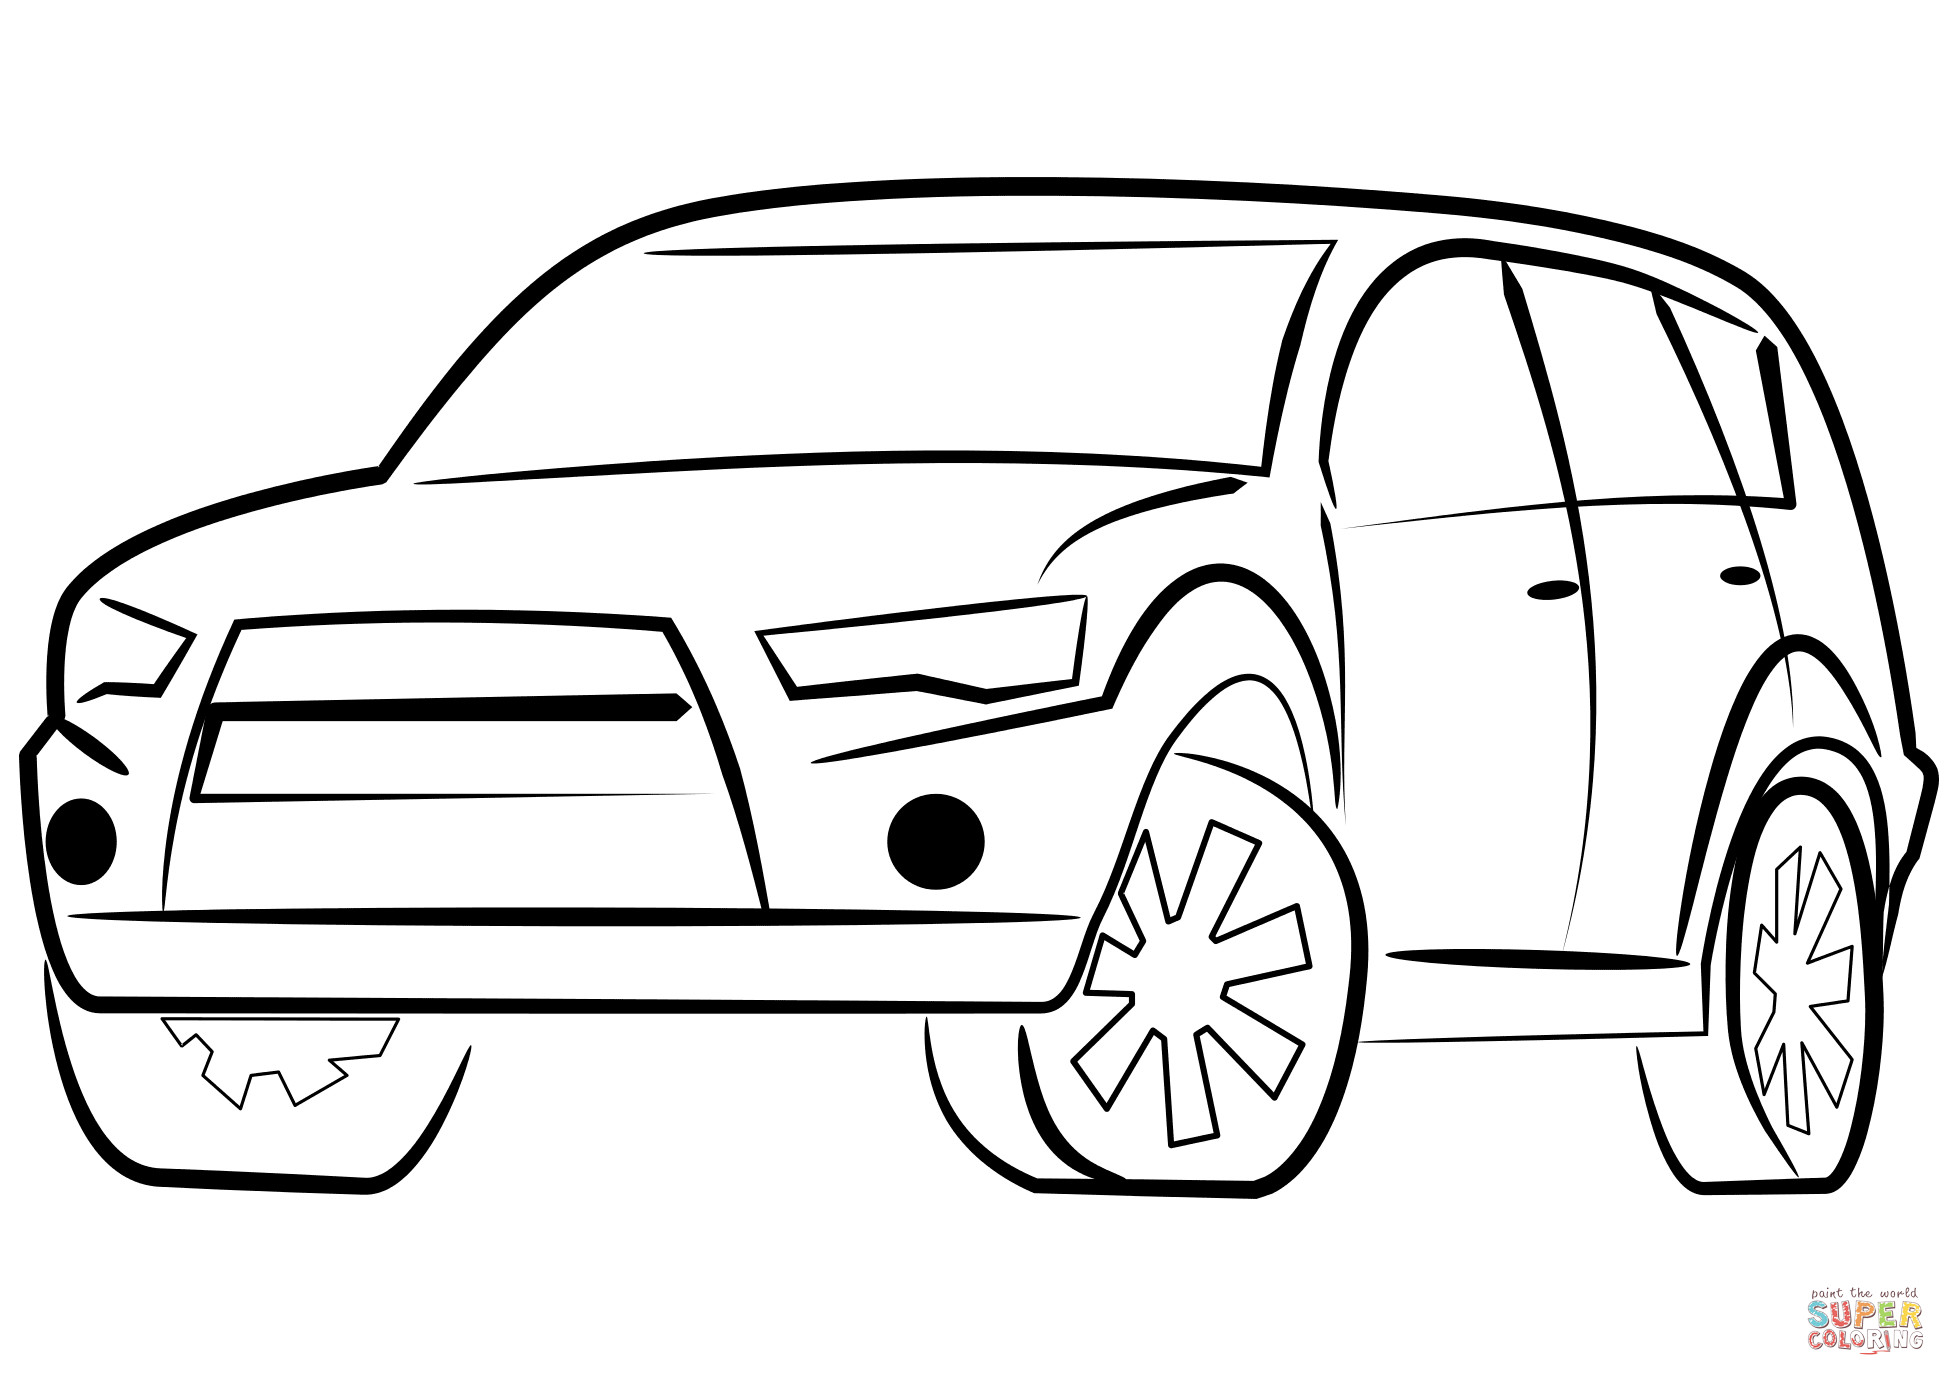 Easy Coloring Pages For Boys Car
 SUV Car coloring page